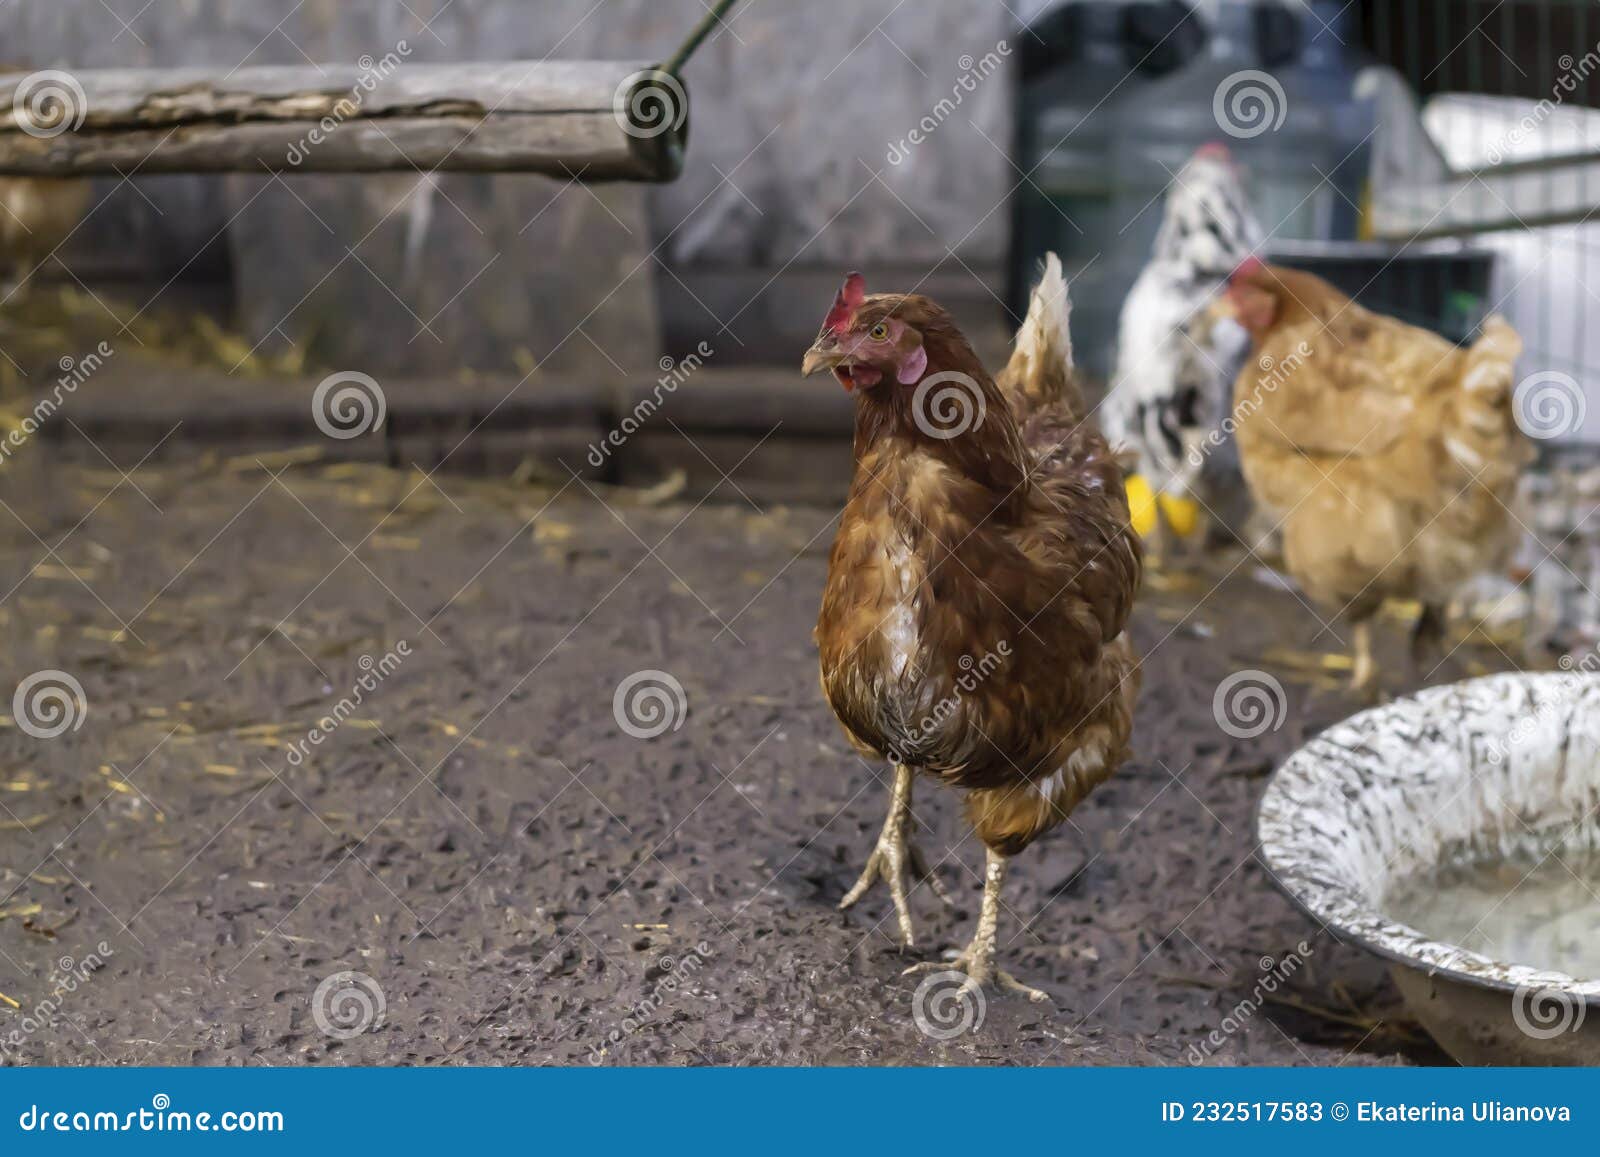 Two Homemade Brown Chickens are Walking in a Chicken Coop. Stock Image -  Image of poultry, chicken: 232517583